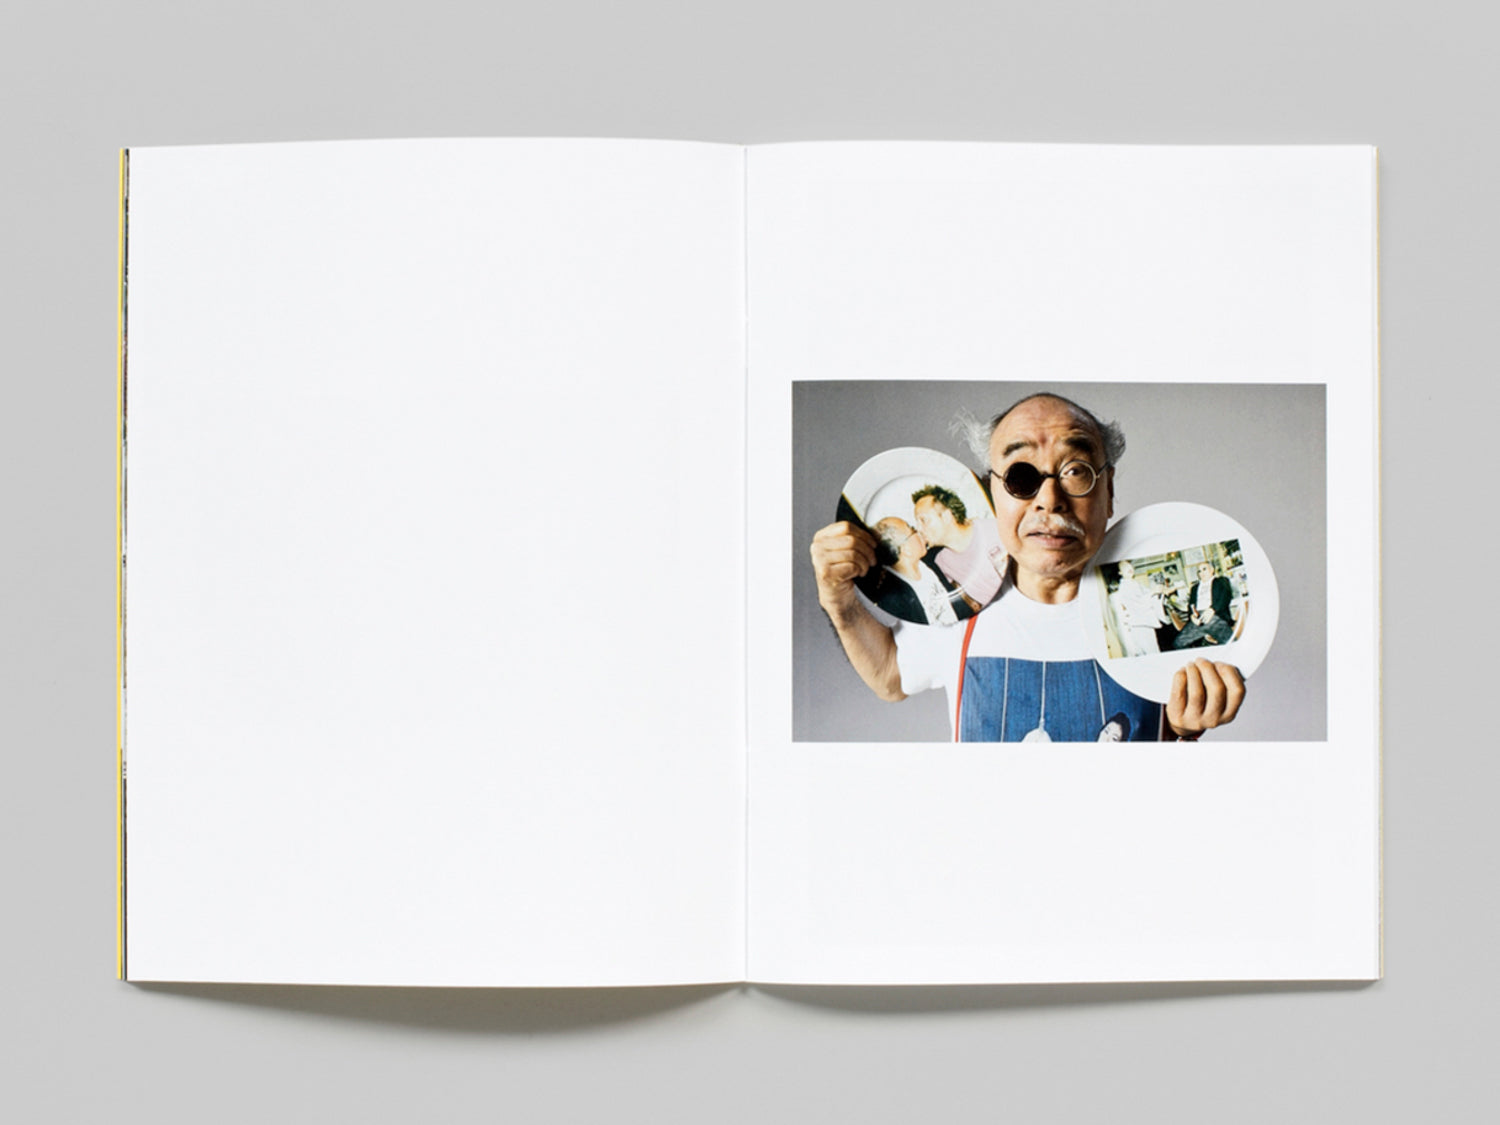 Load image into Gallery viewer, The Master I – V collection set by Juergen Teller